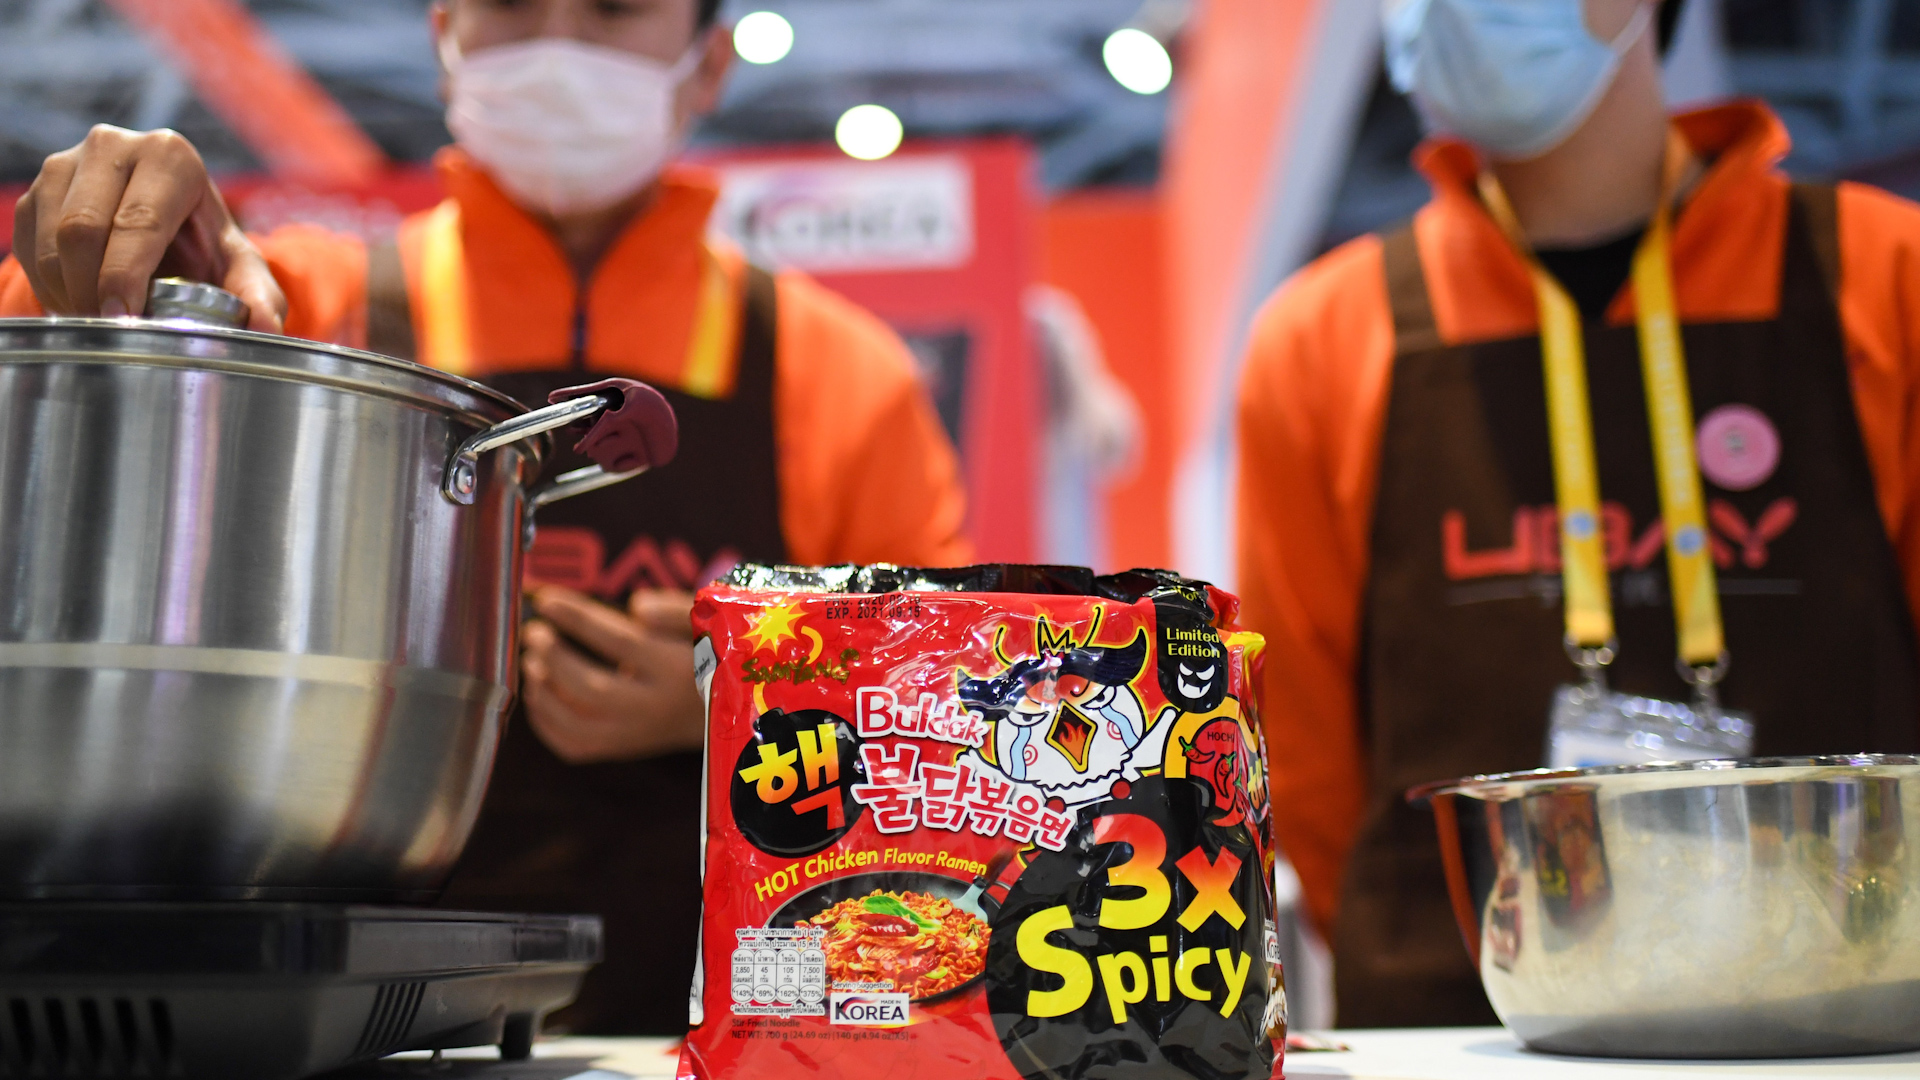 Denmark recalled spicy ramen brand Samyang due to health risks, citing acute poisoning potential. The noodles became popular on social media.